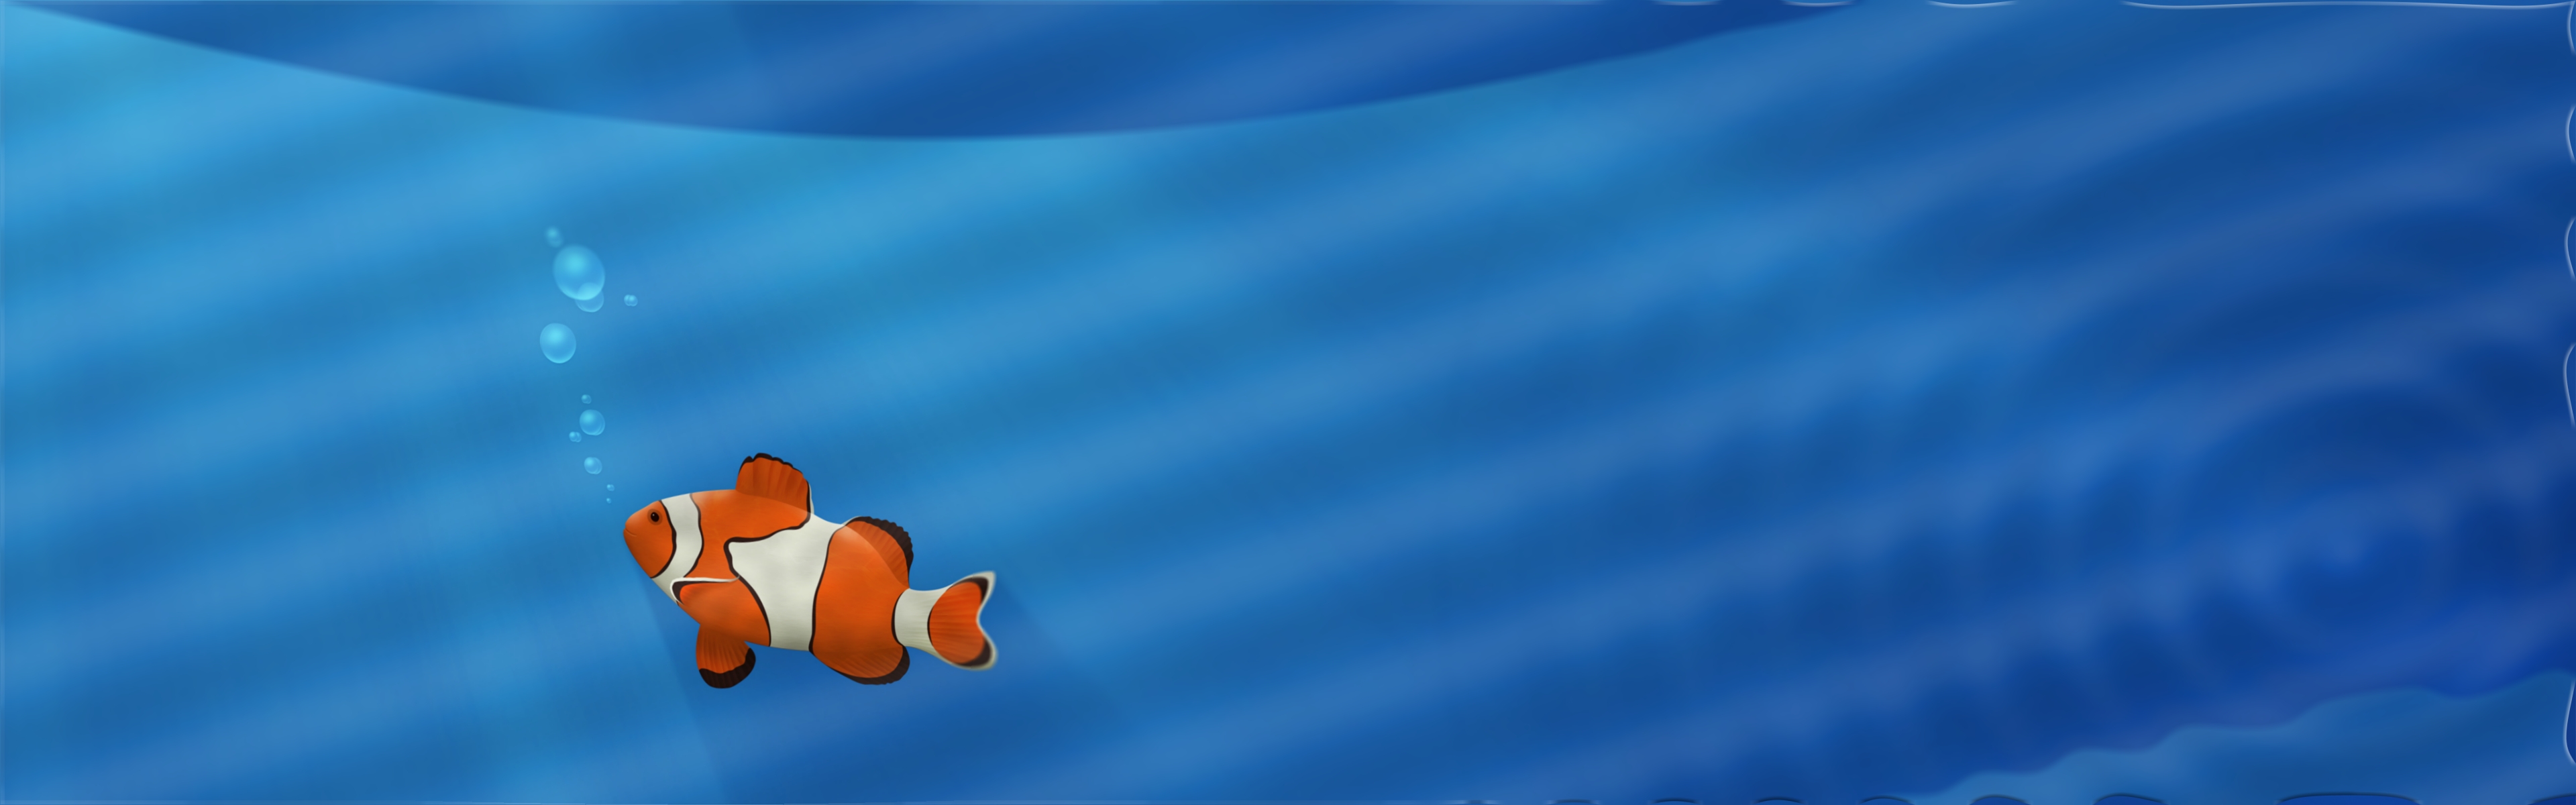 Related Pictures Finding Nemo Wallpaper